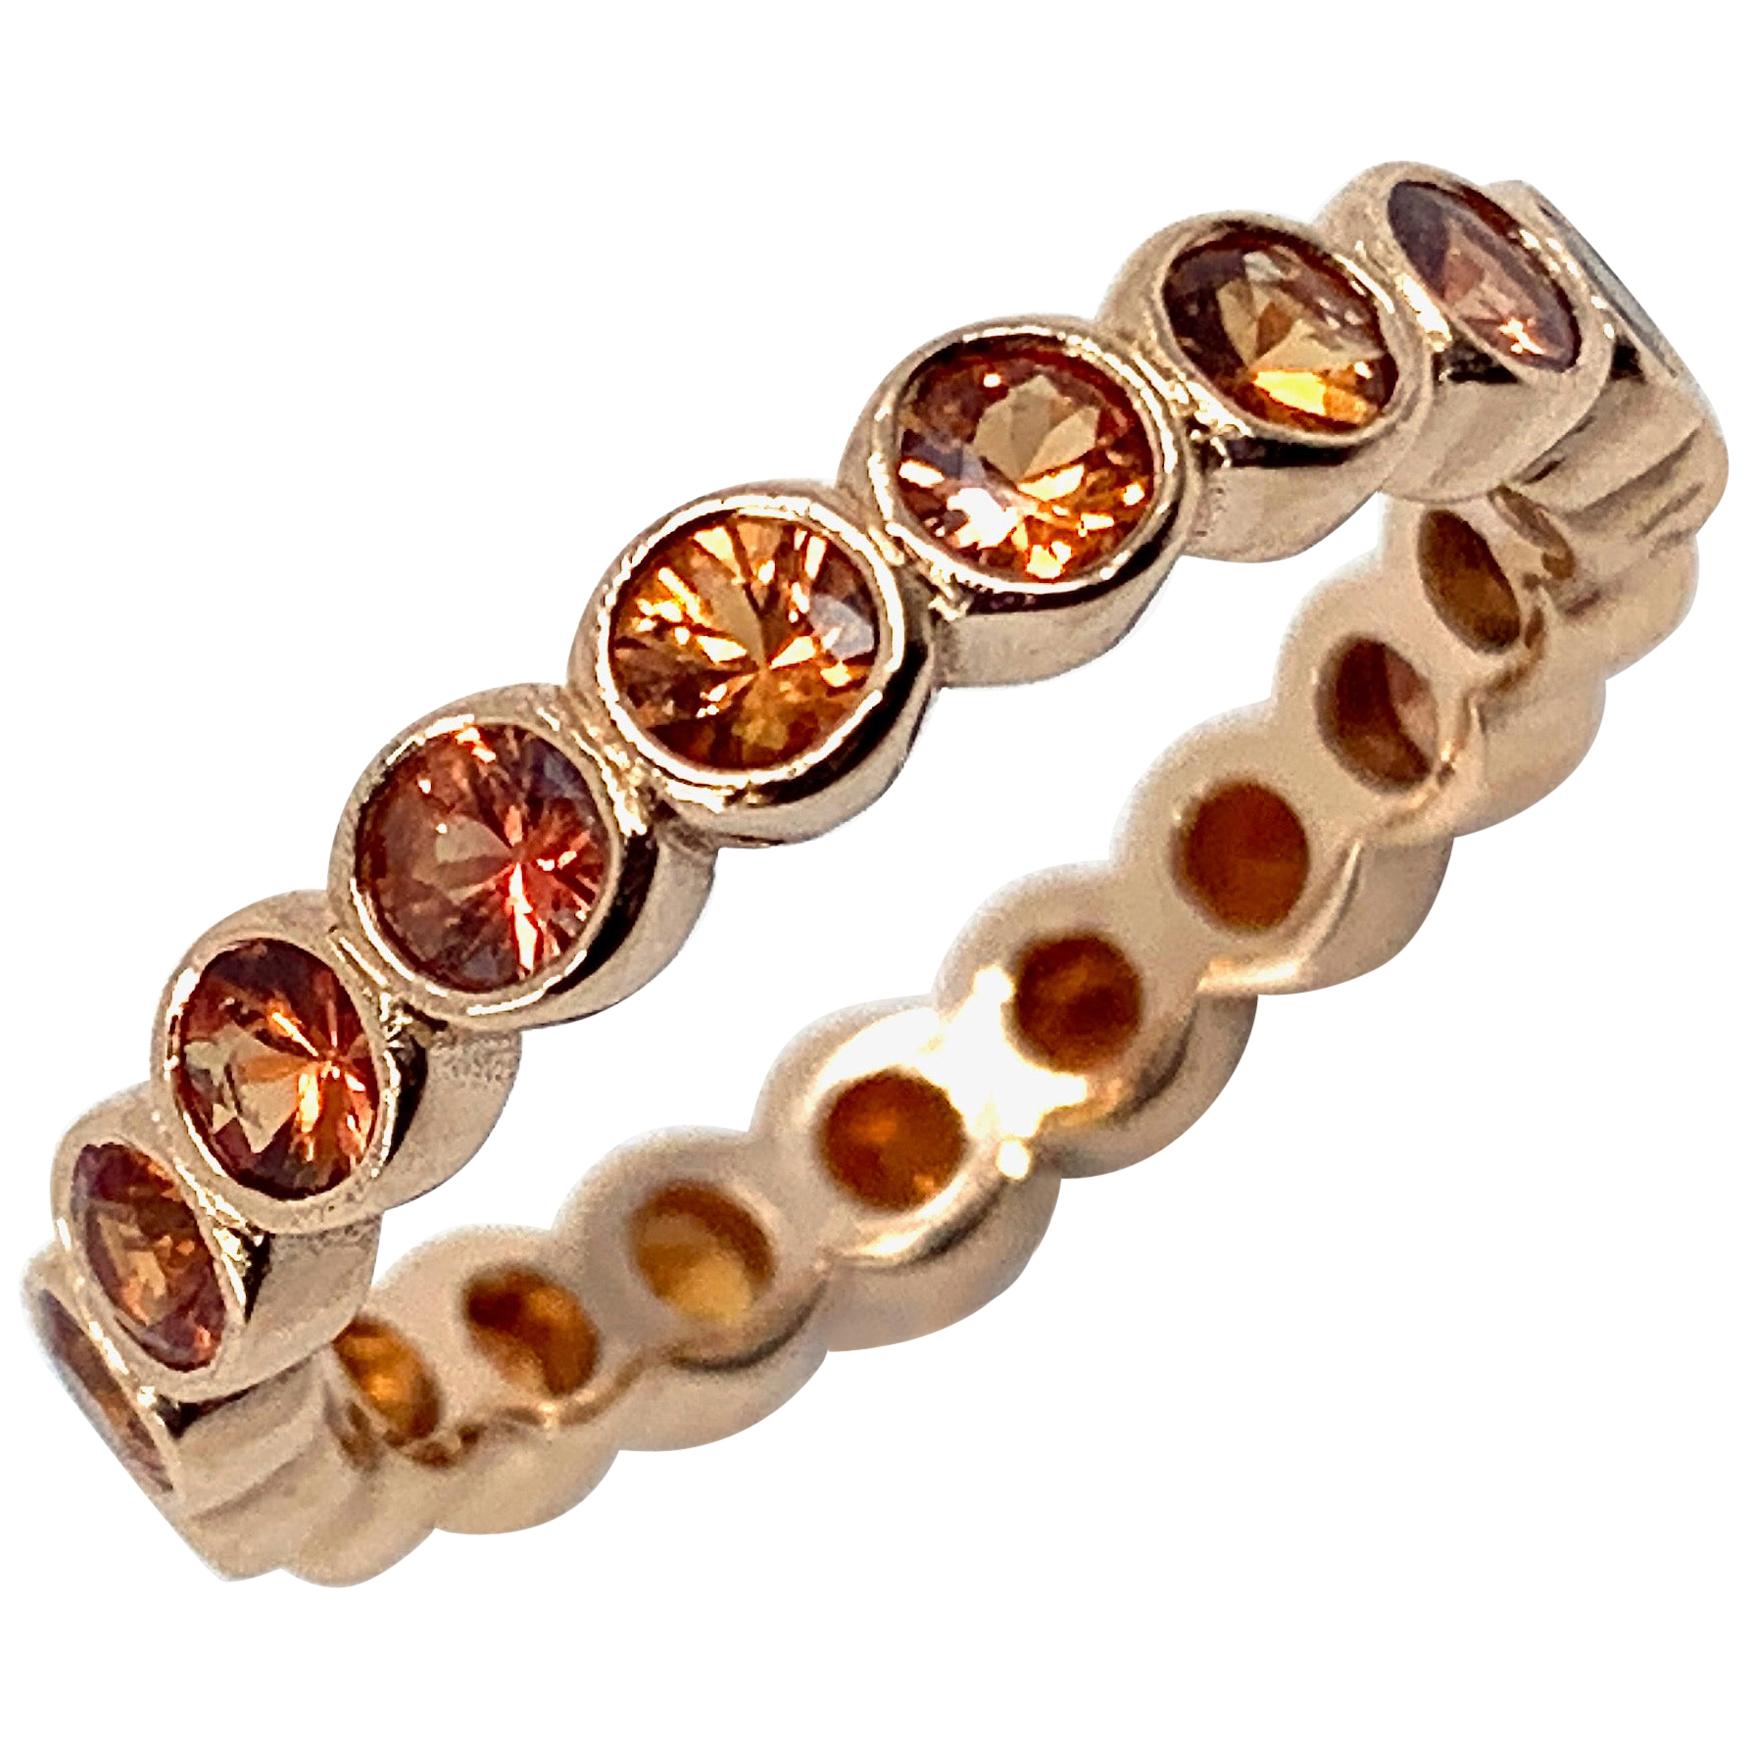 Orange sapphires look great set in rose gold, and this presentation, by Eytan Brandes, is especially appealing -- 19 vivid hand-picked Tanzanian bird of paradise sapphires ranging from medium-light to dark orange are perfectly mounted in open-back